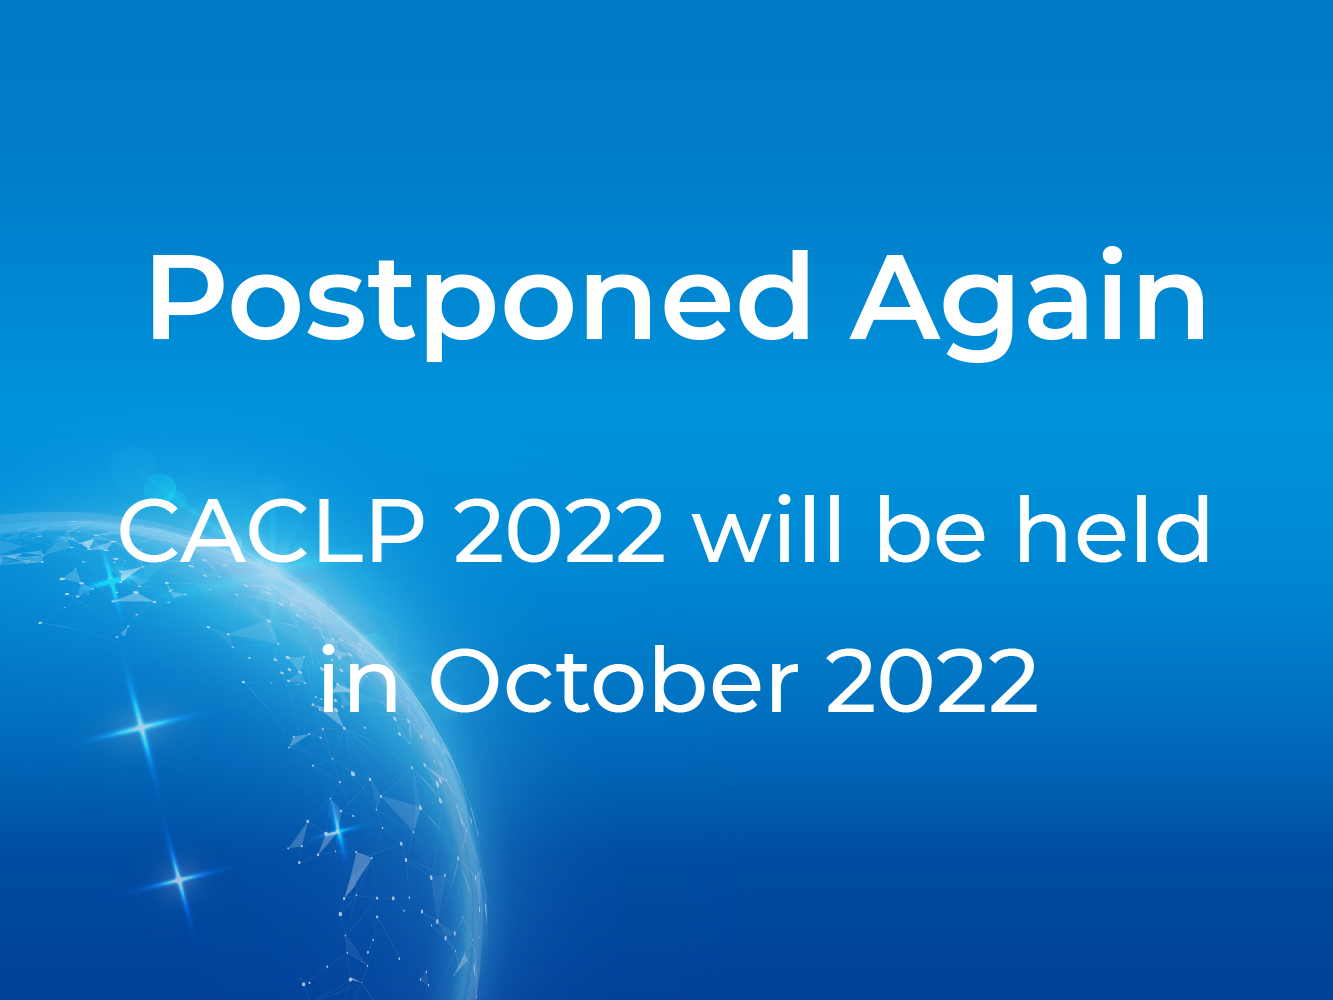 CACLP 2022 TO BE POSTPONED TO OCTOBER 2022